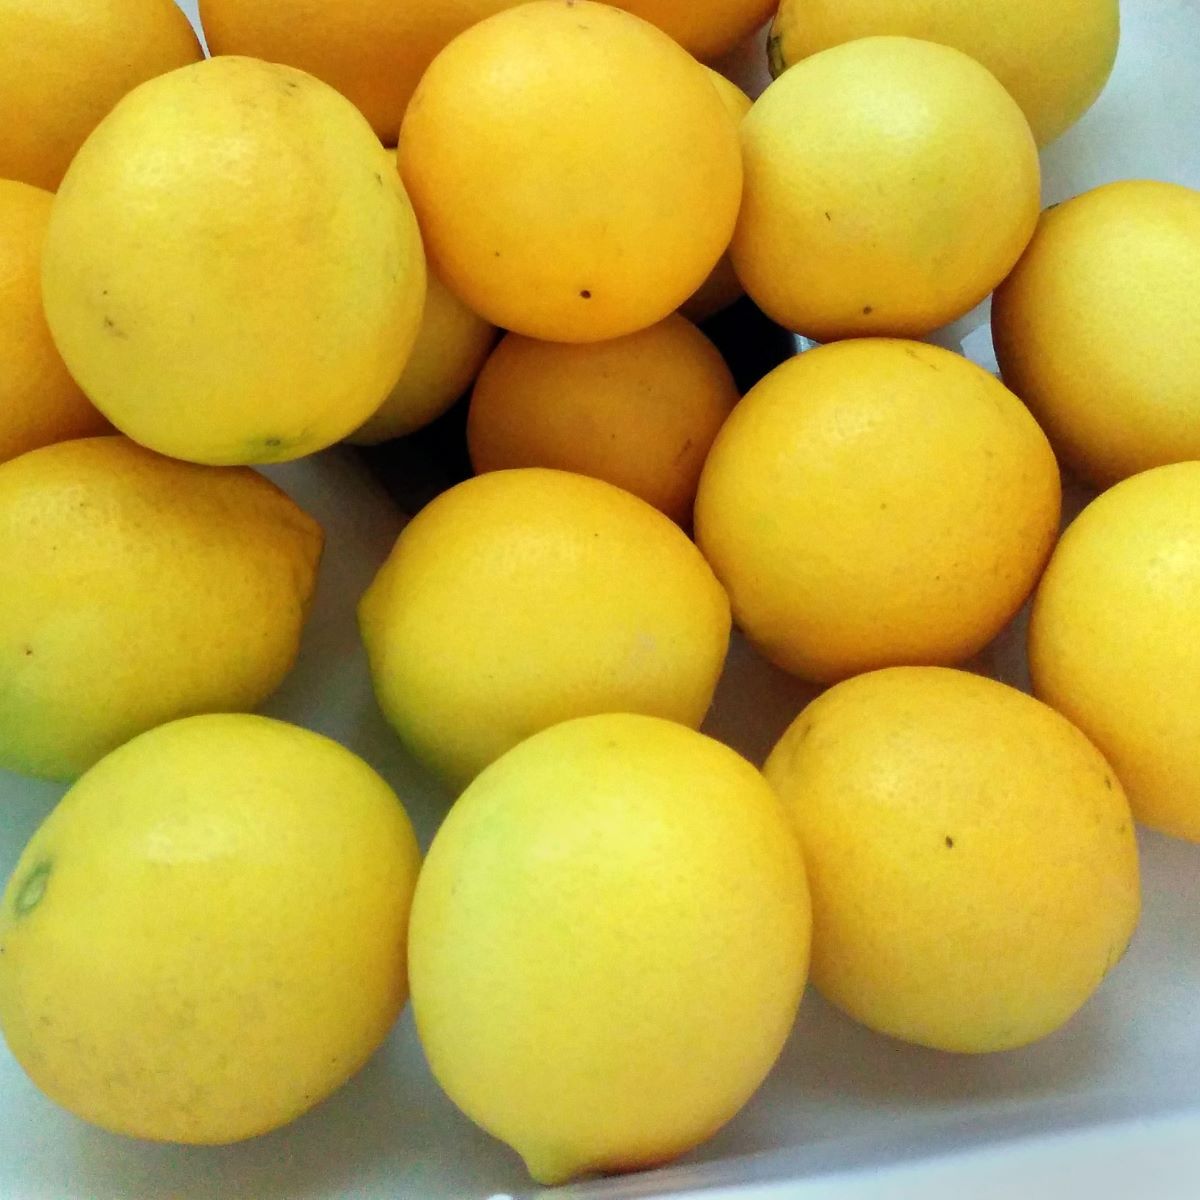 How To Store Lemons In Freezer